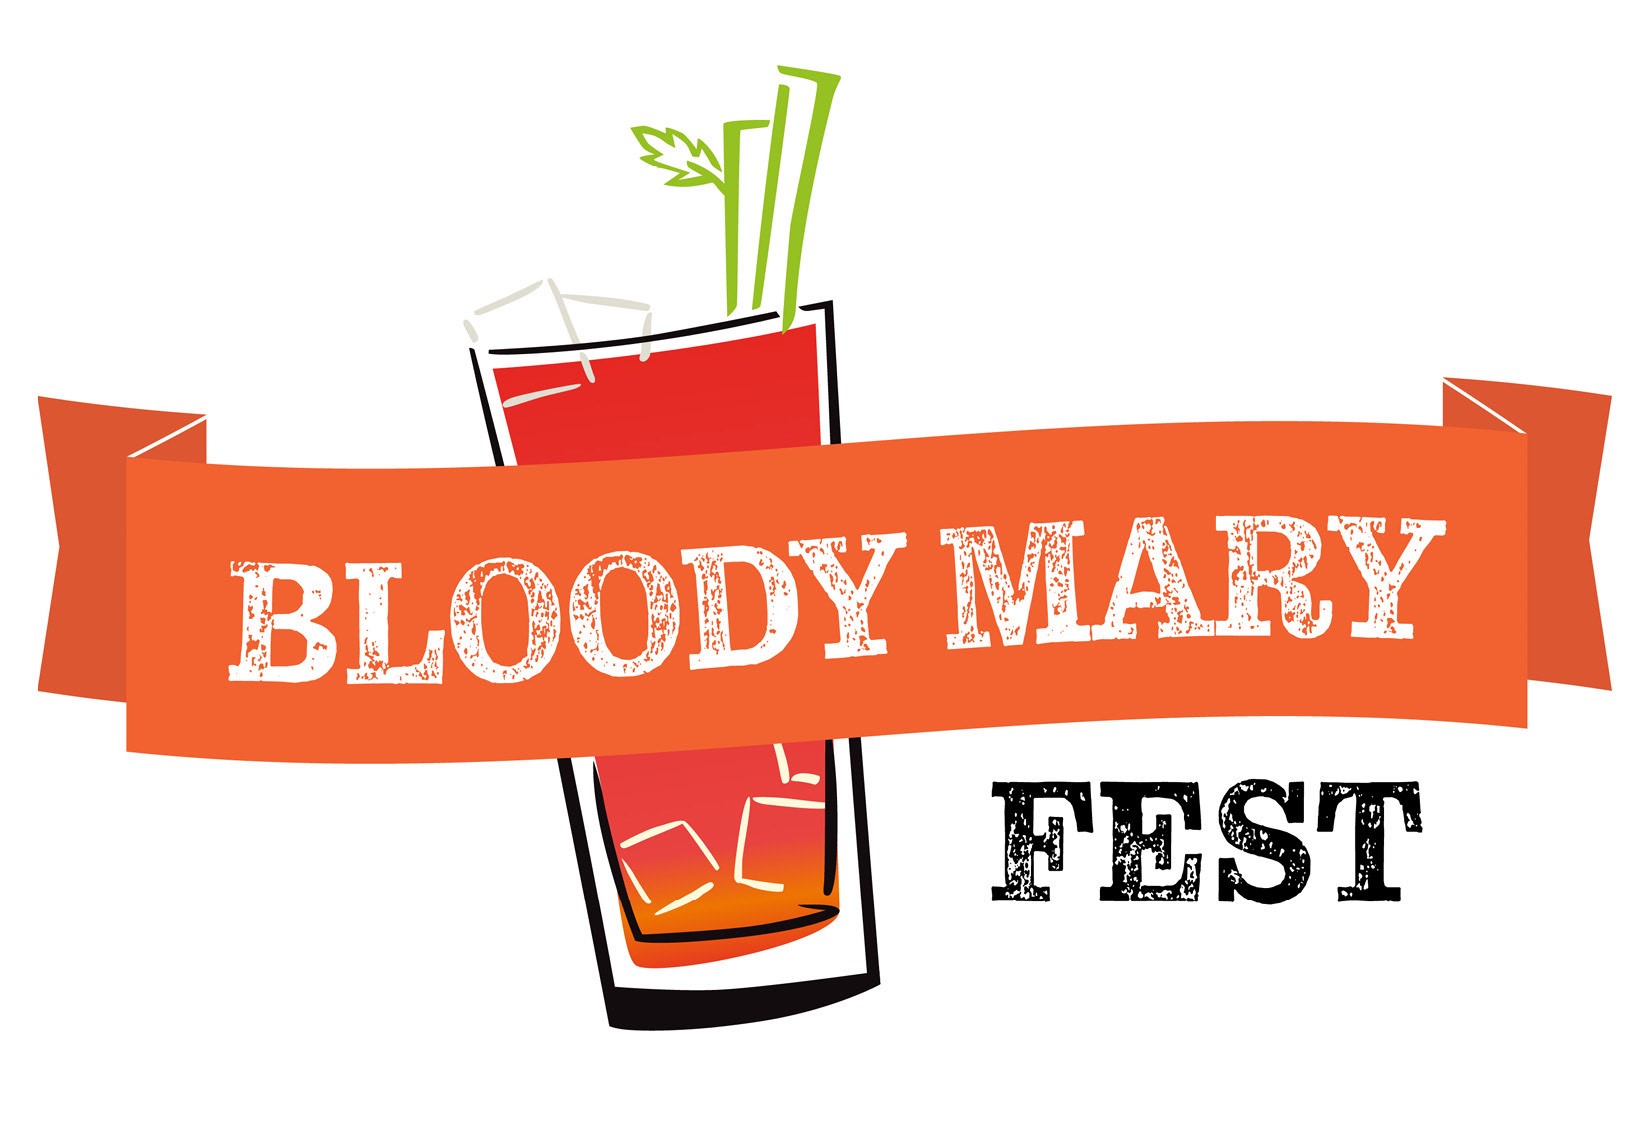 Duluth Bloody Mary Fest